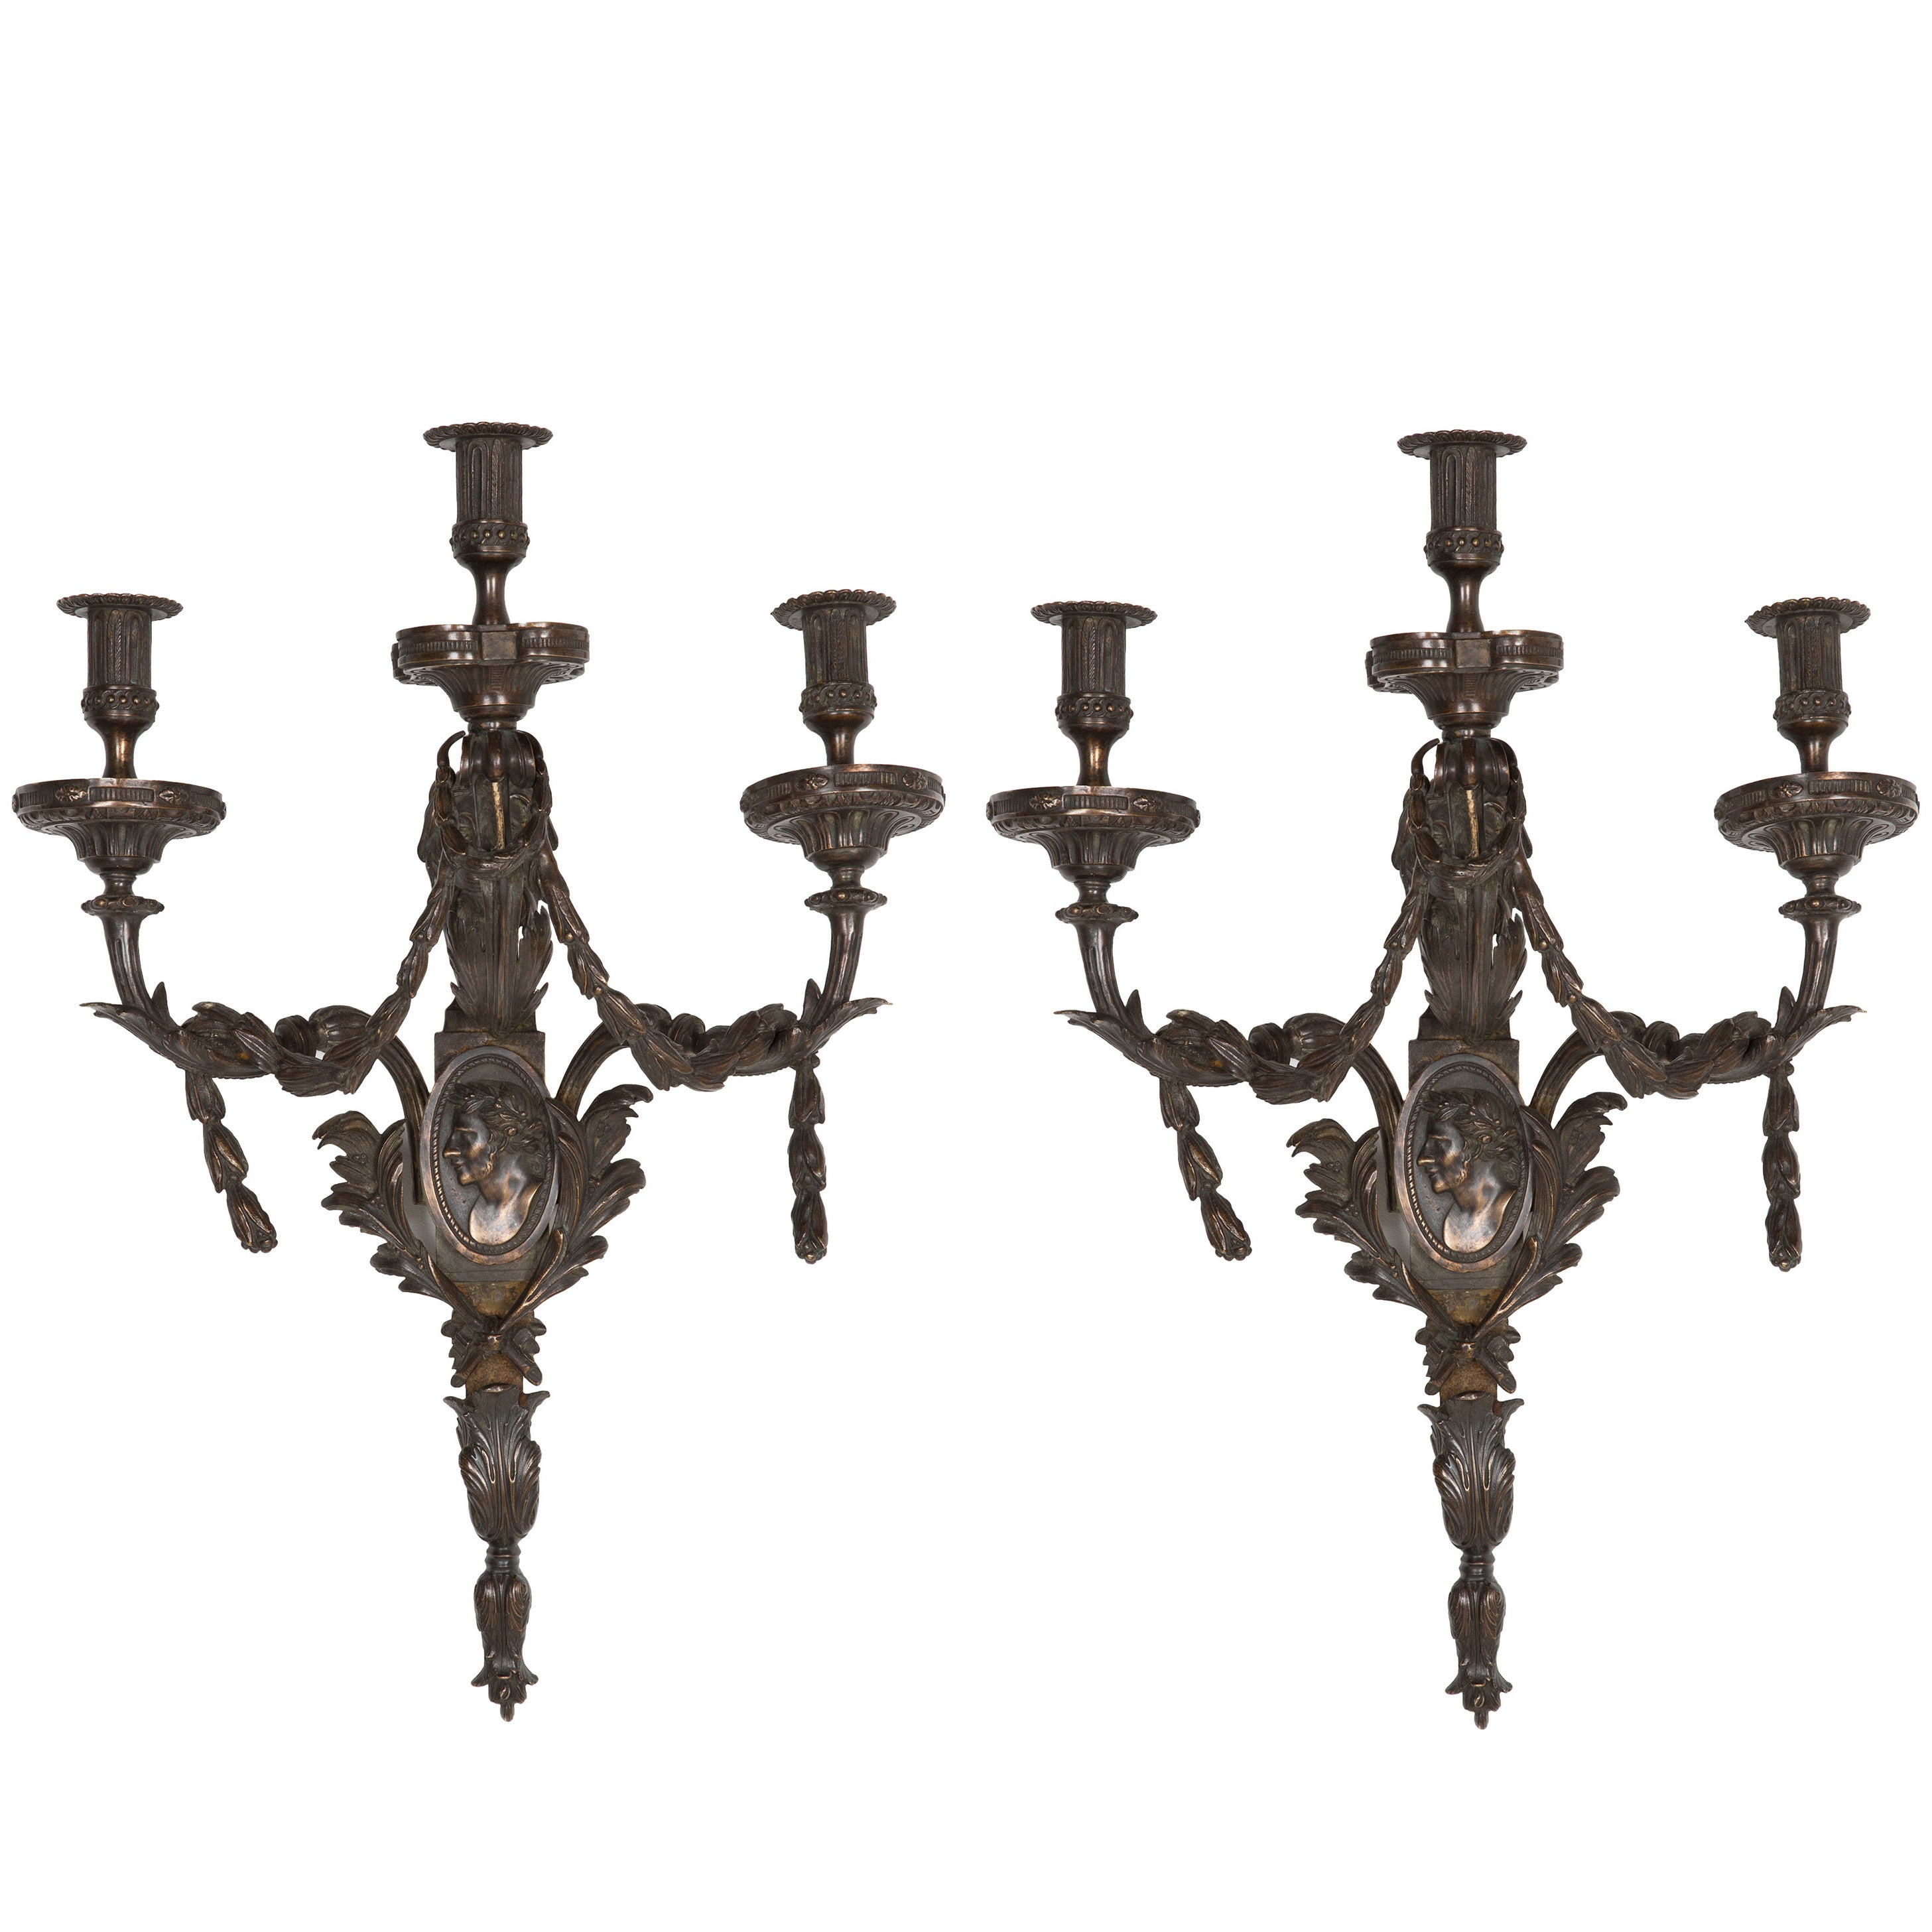 A Pair of Large Bronze Wall Lights